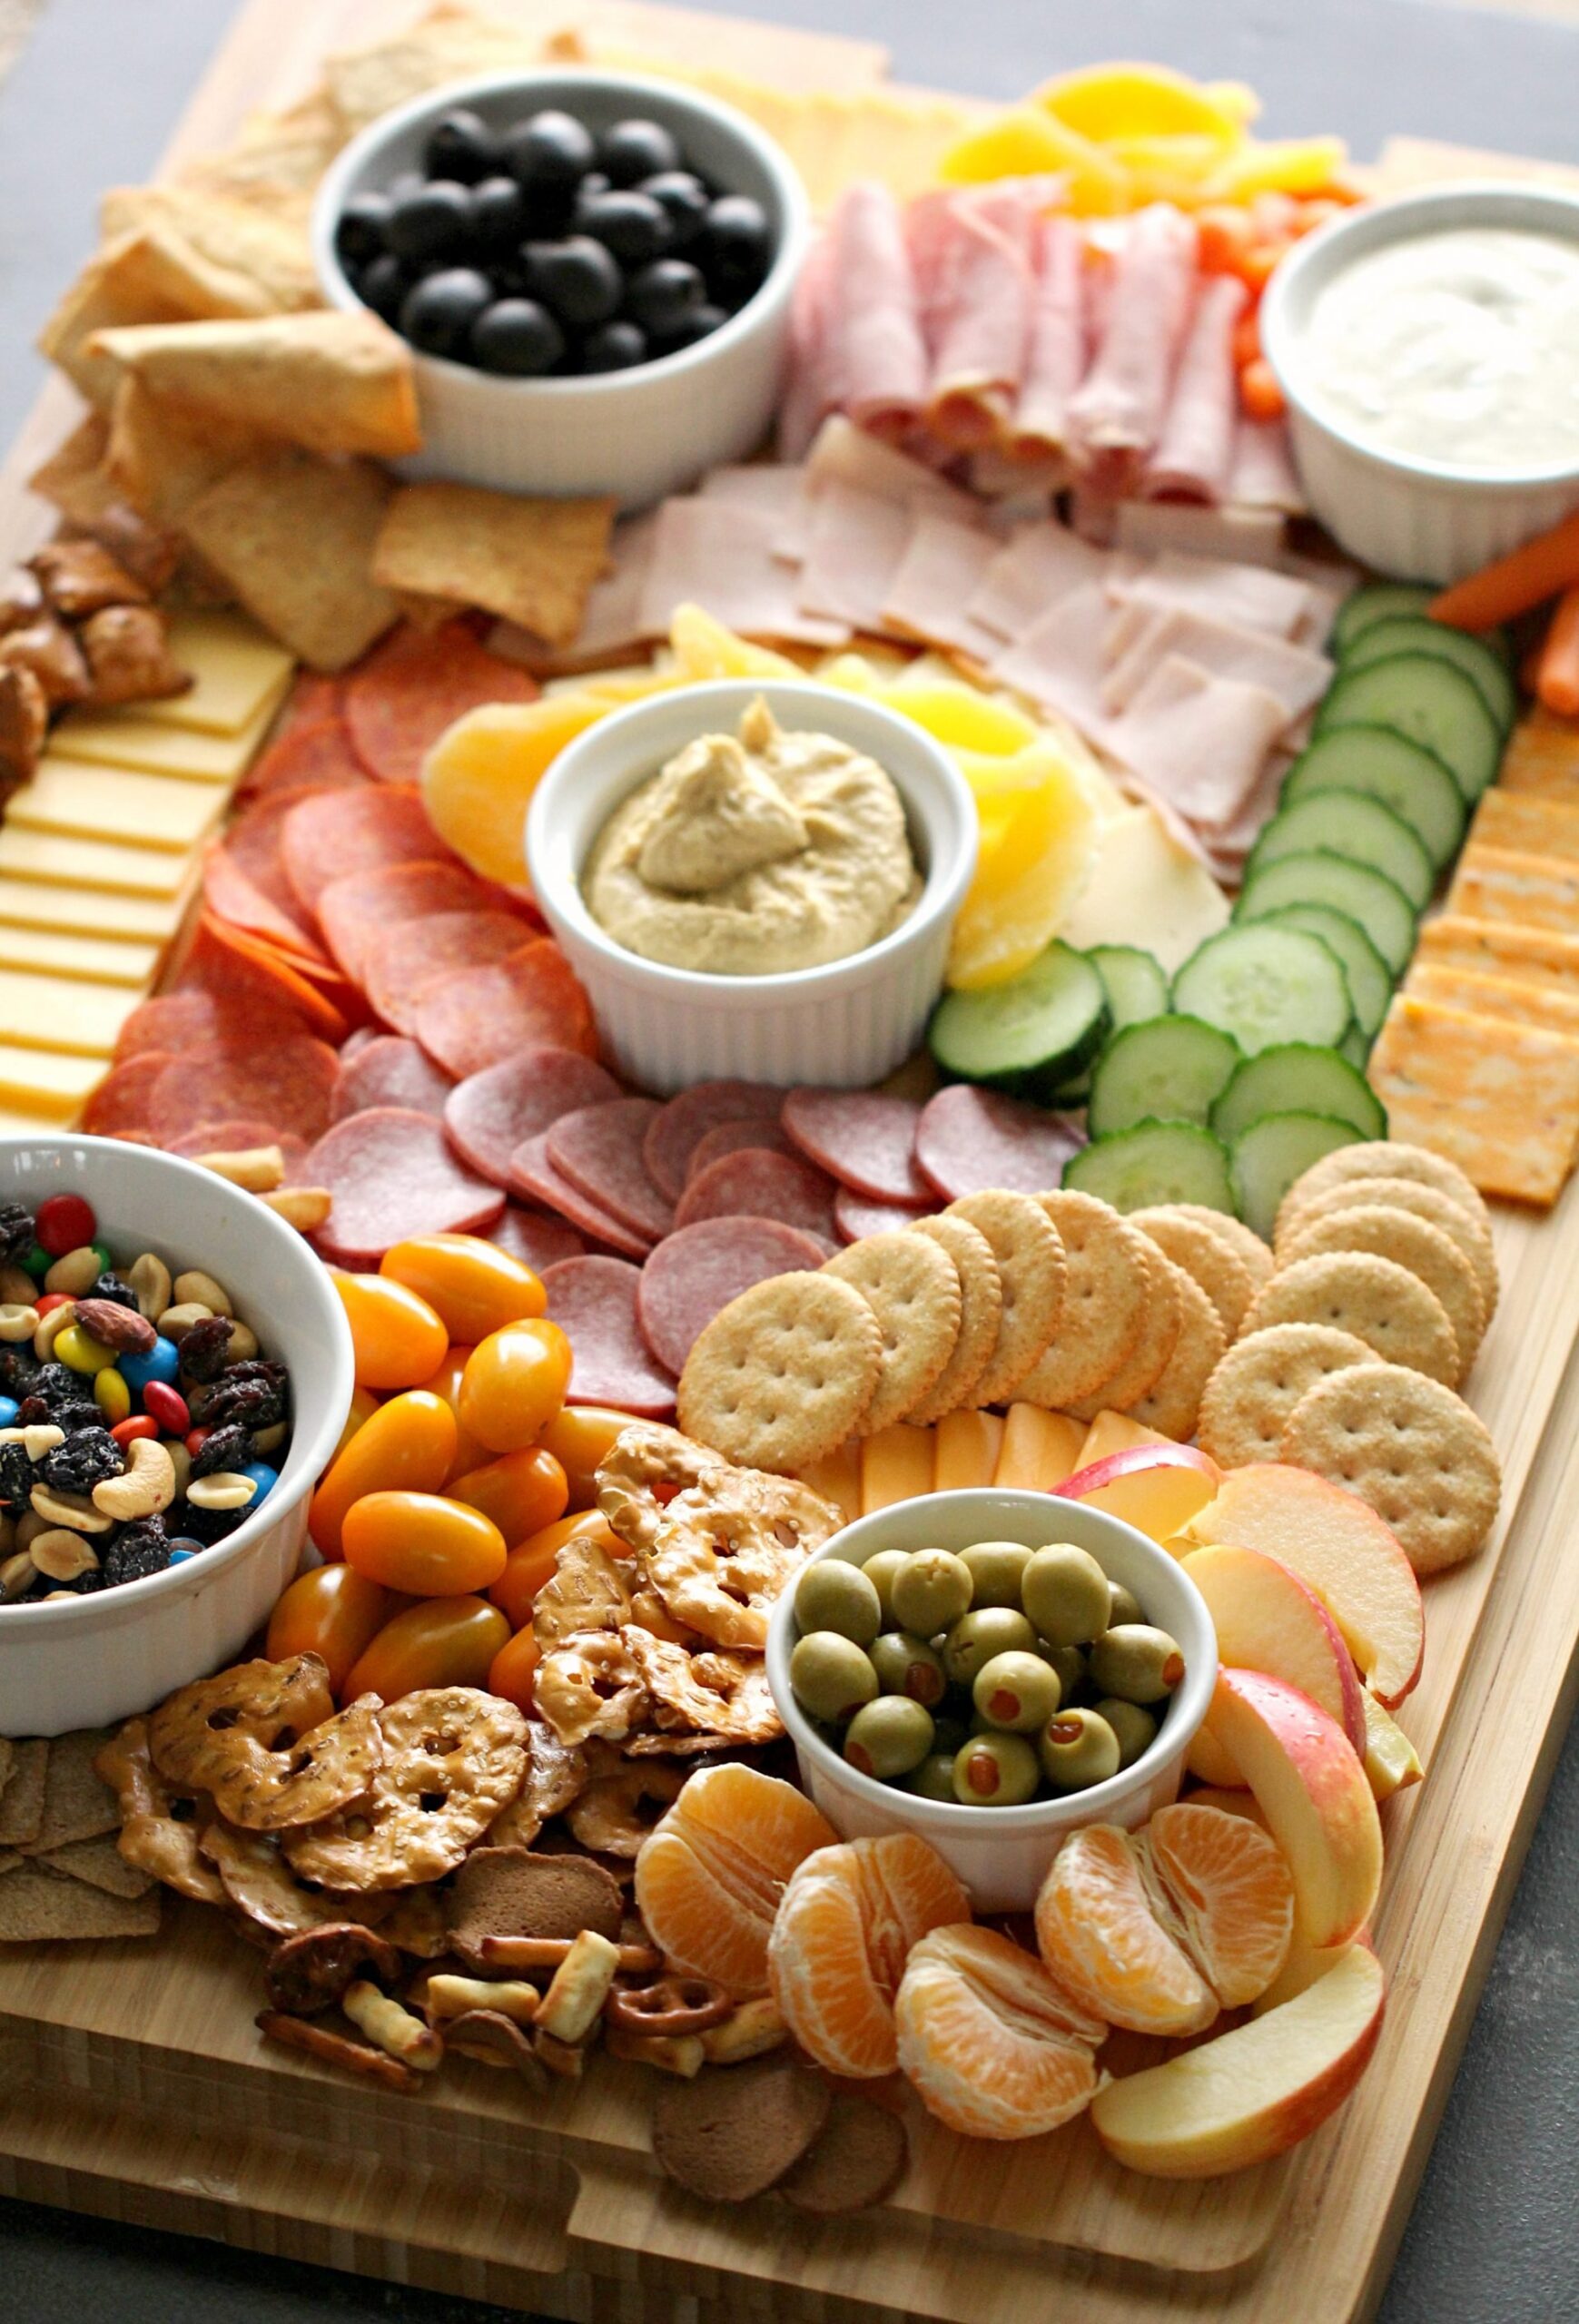 How To Make A Kid-Friendly Charcuterie Board [Step-by-Step Instructions]
